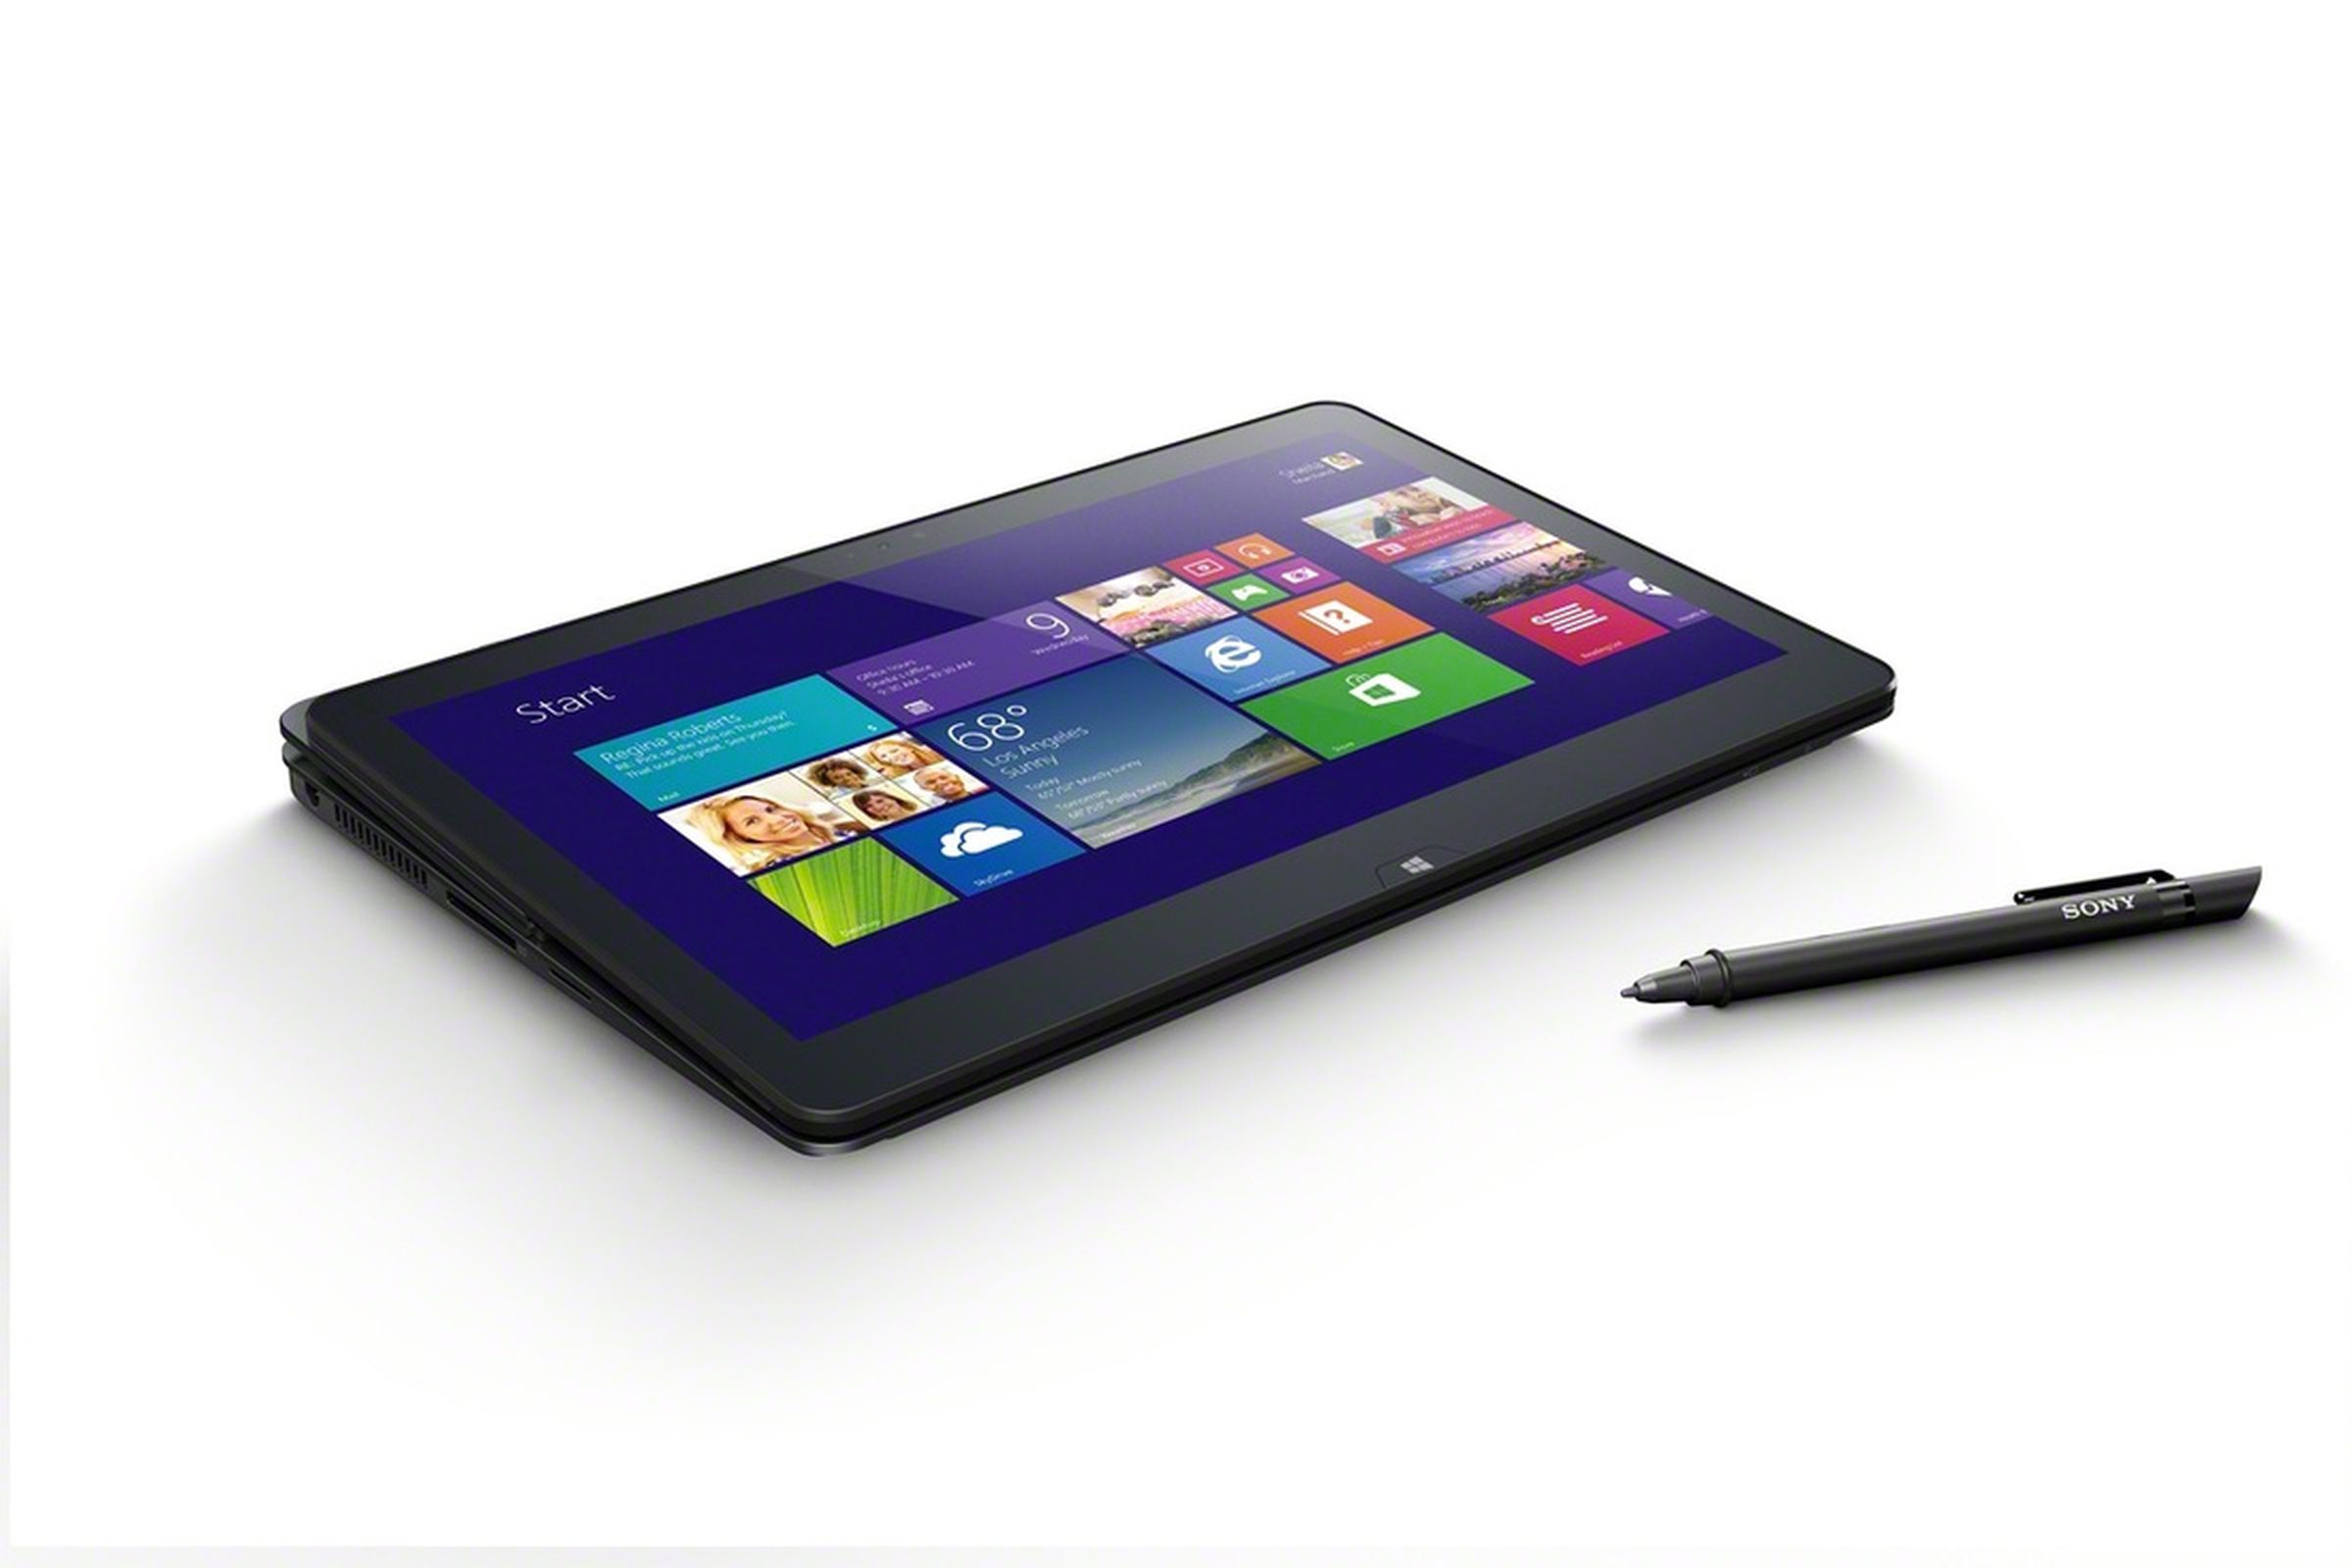 Sony VAIO Fit 11A (embargoed)